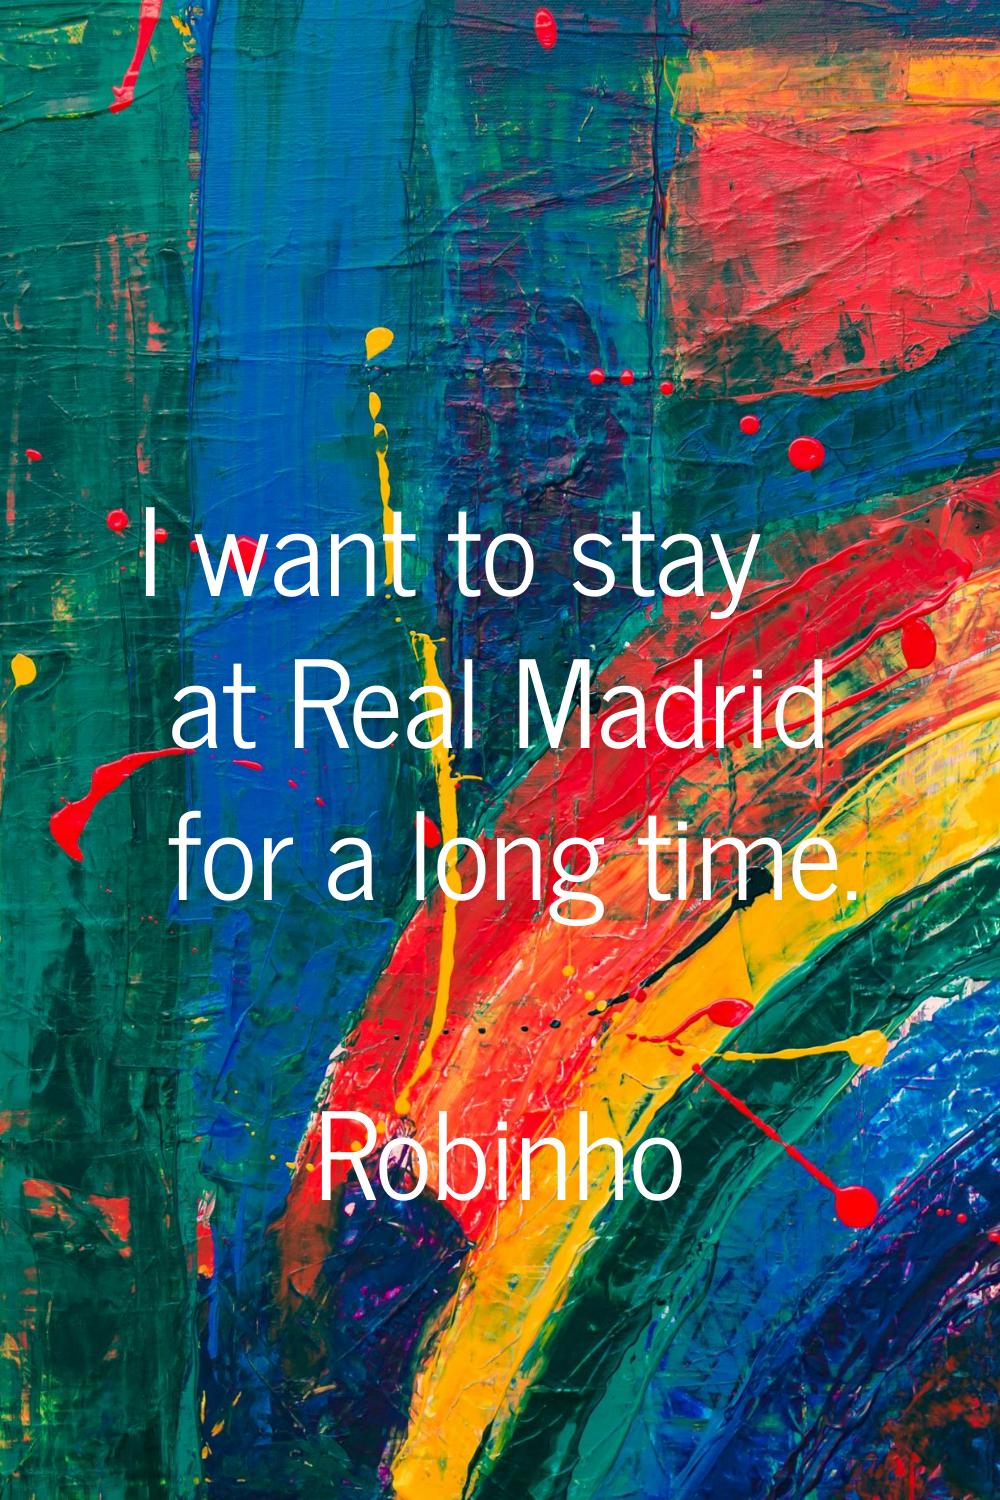 I want to stay at Real Madrid for a long time.